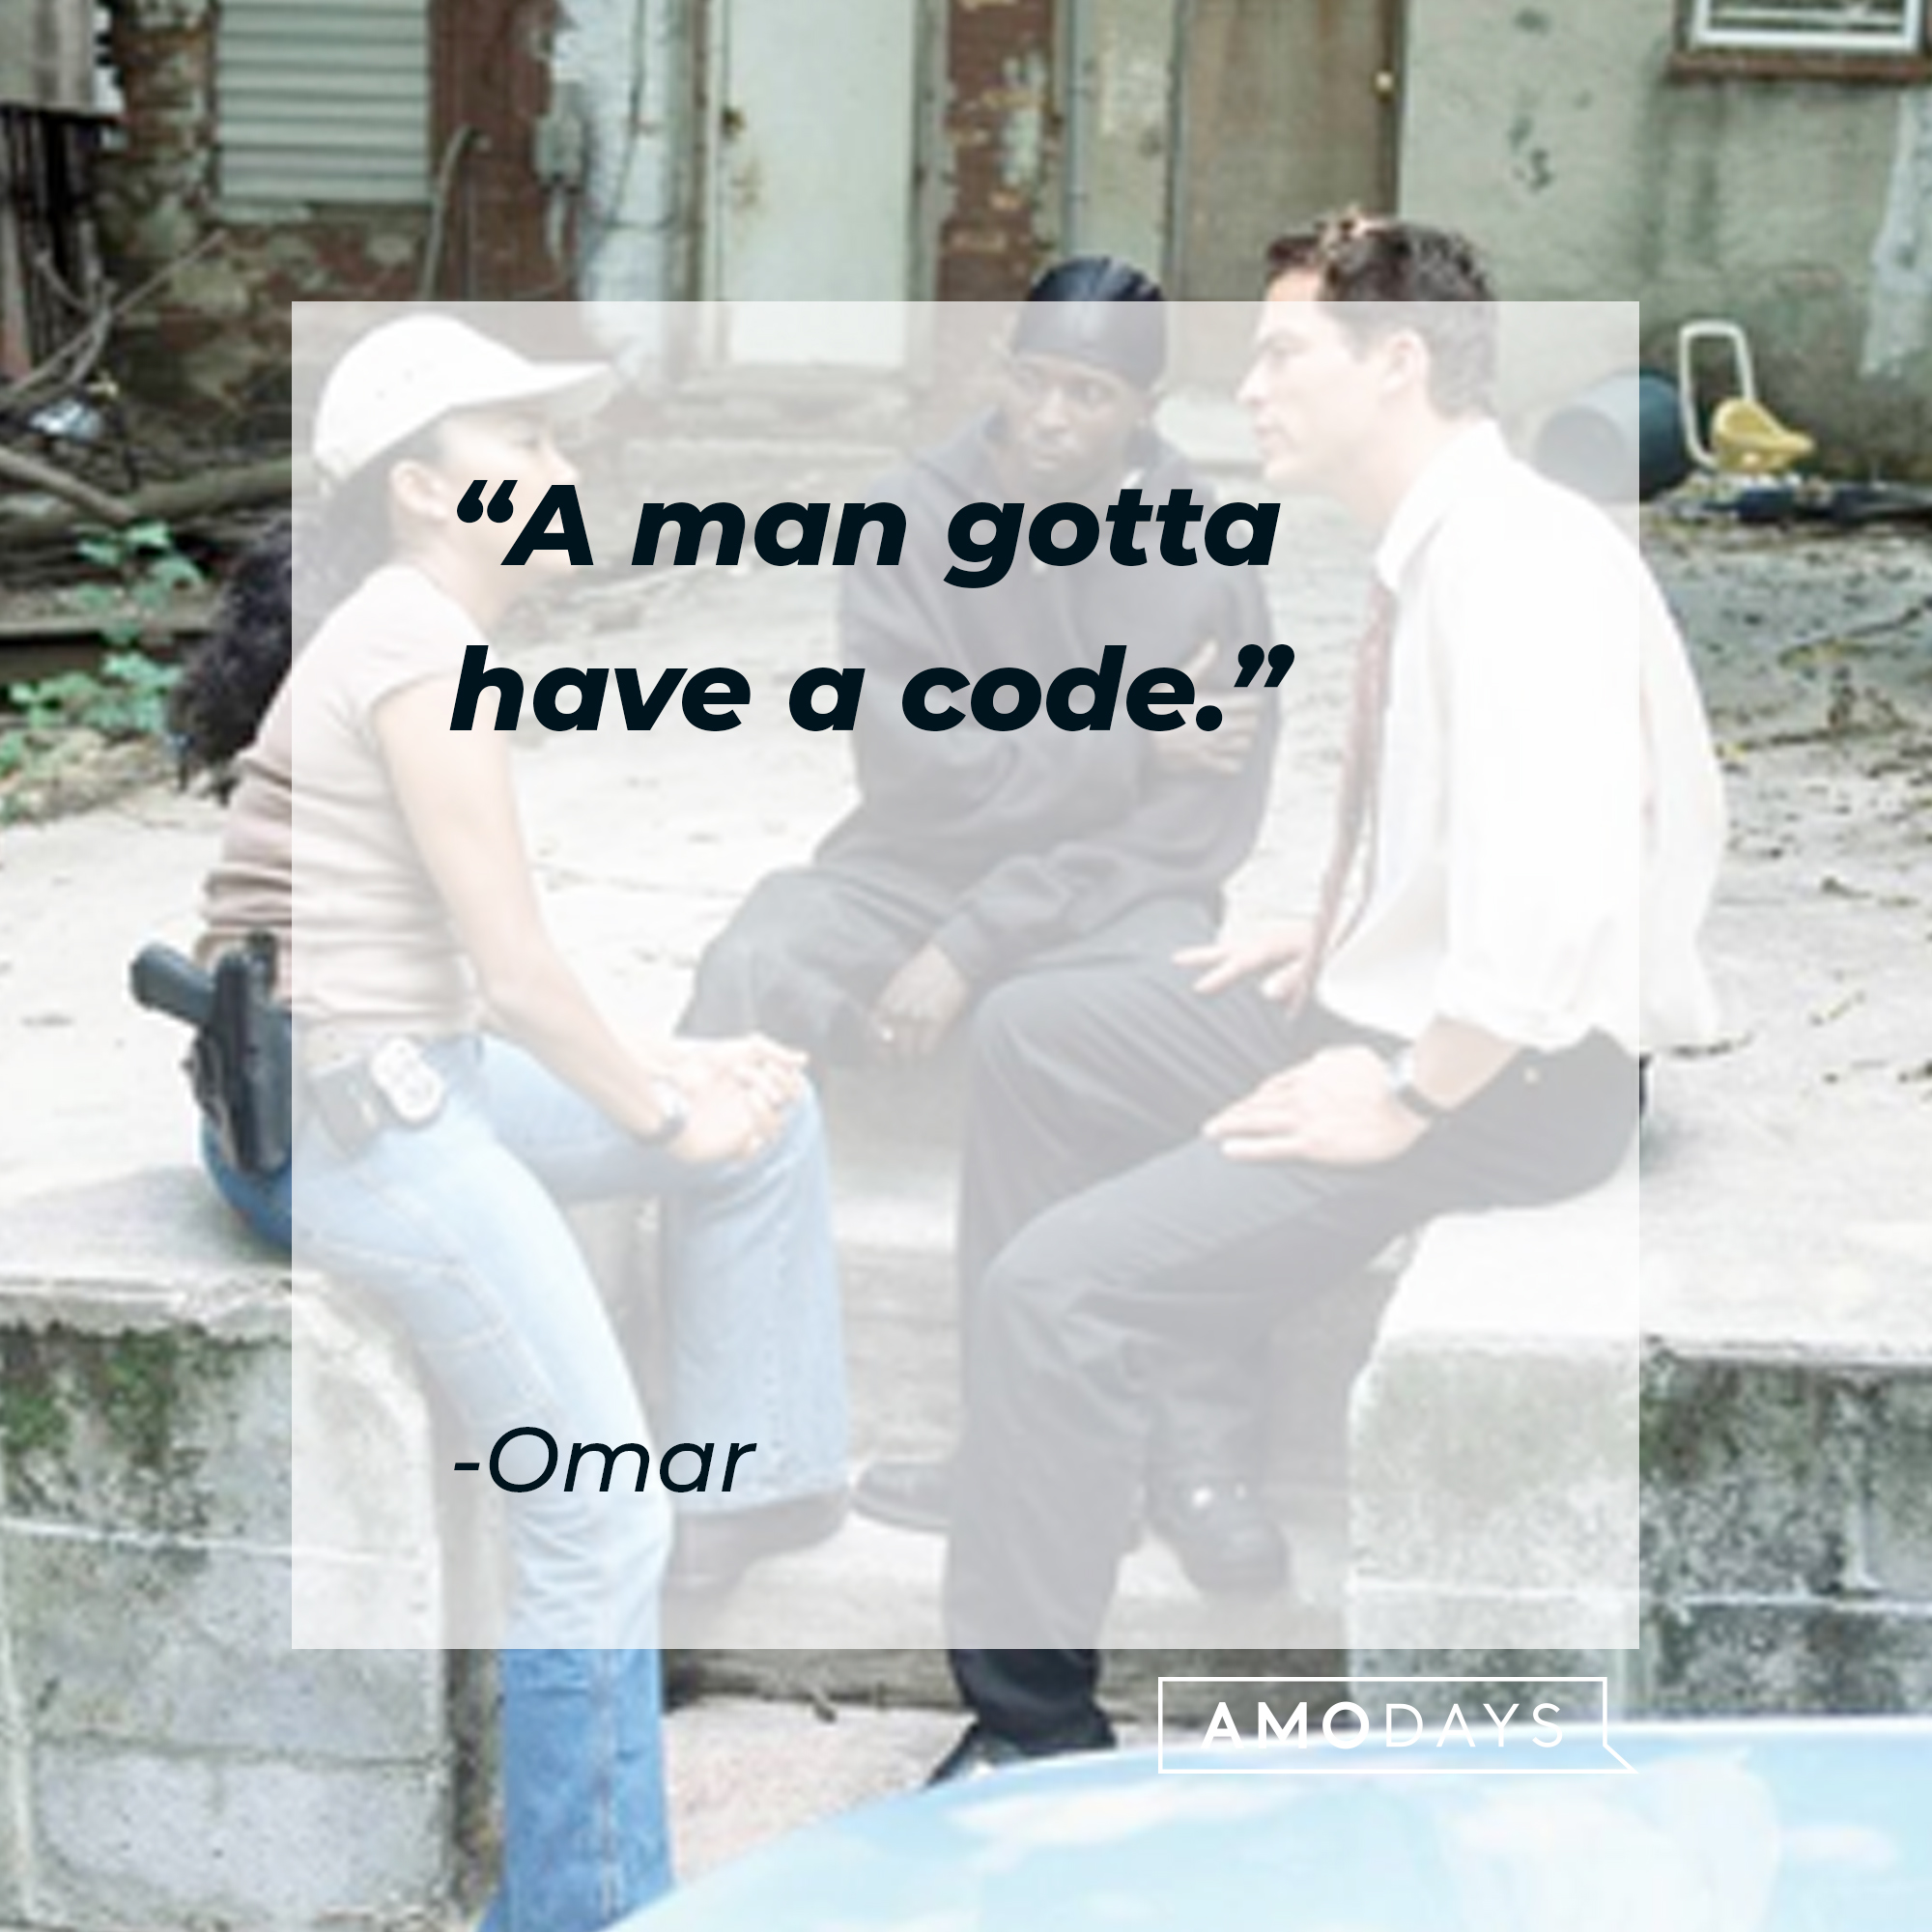 Omar's quote: "A man gotta have a code." | Source: facebook.com/TheWire